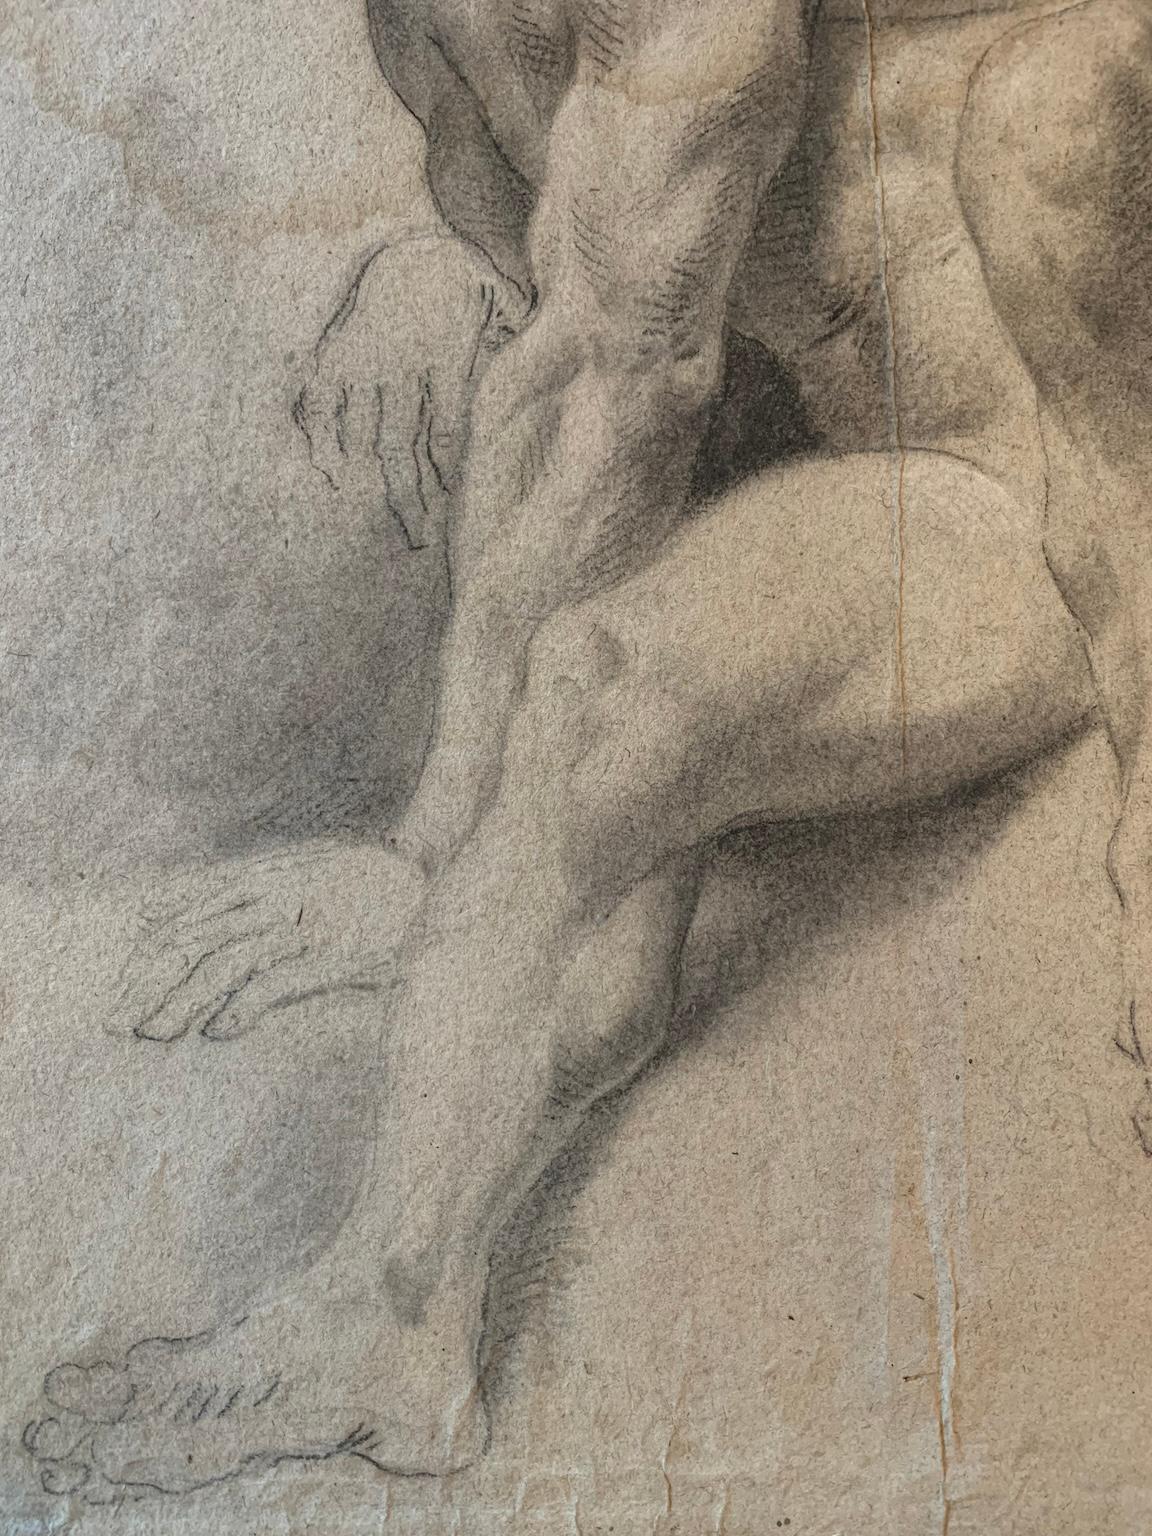 Seated male nude that falls fully within the academic 